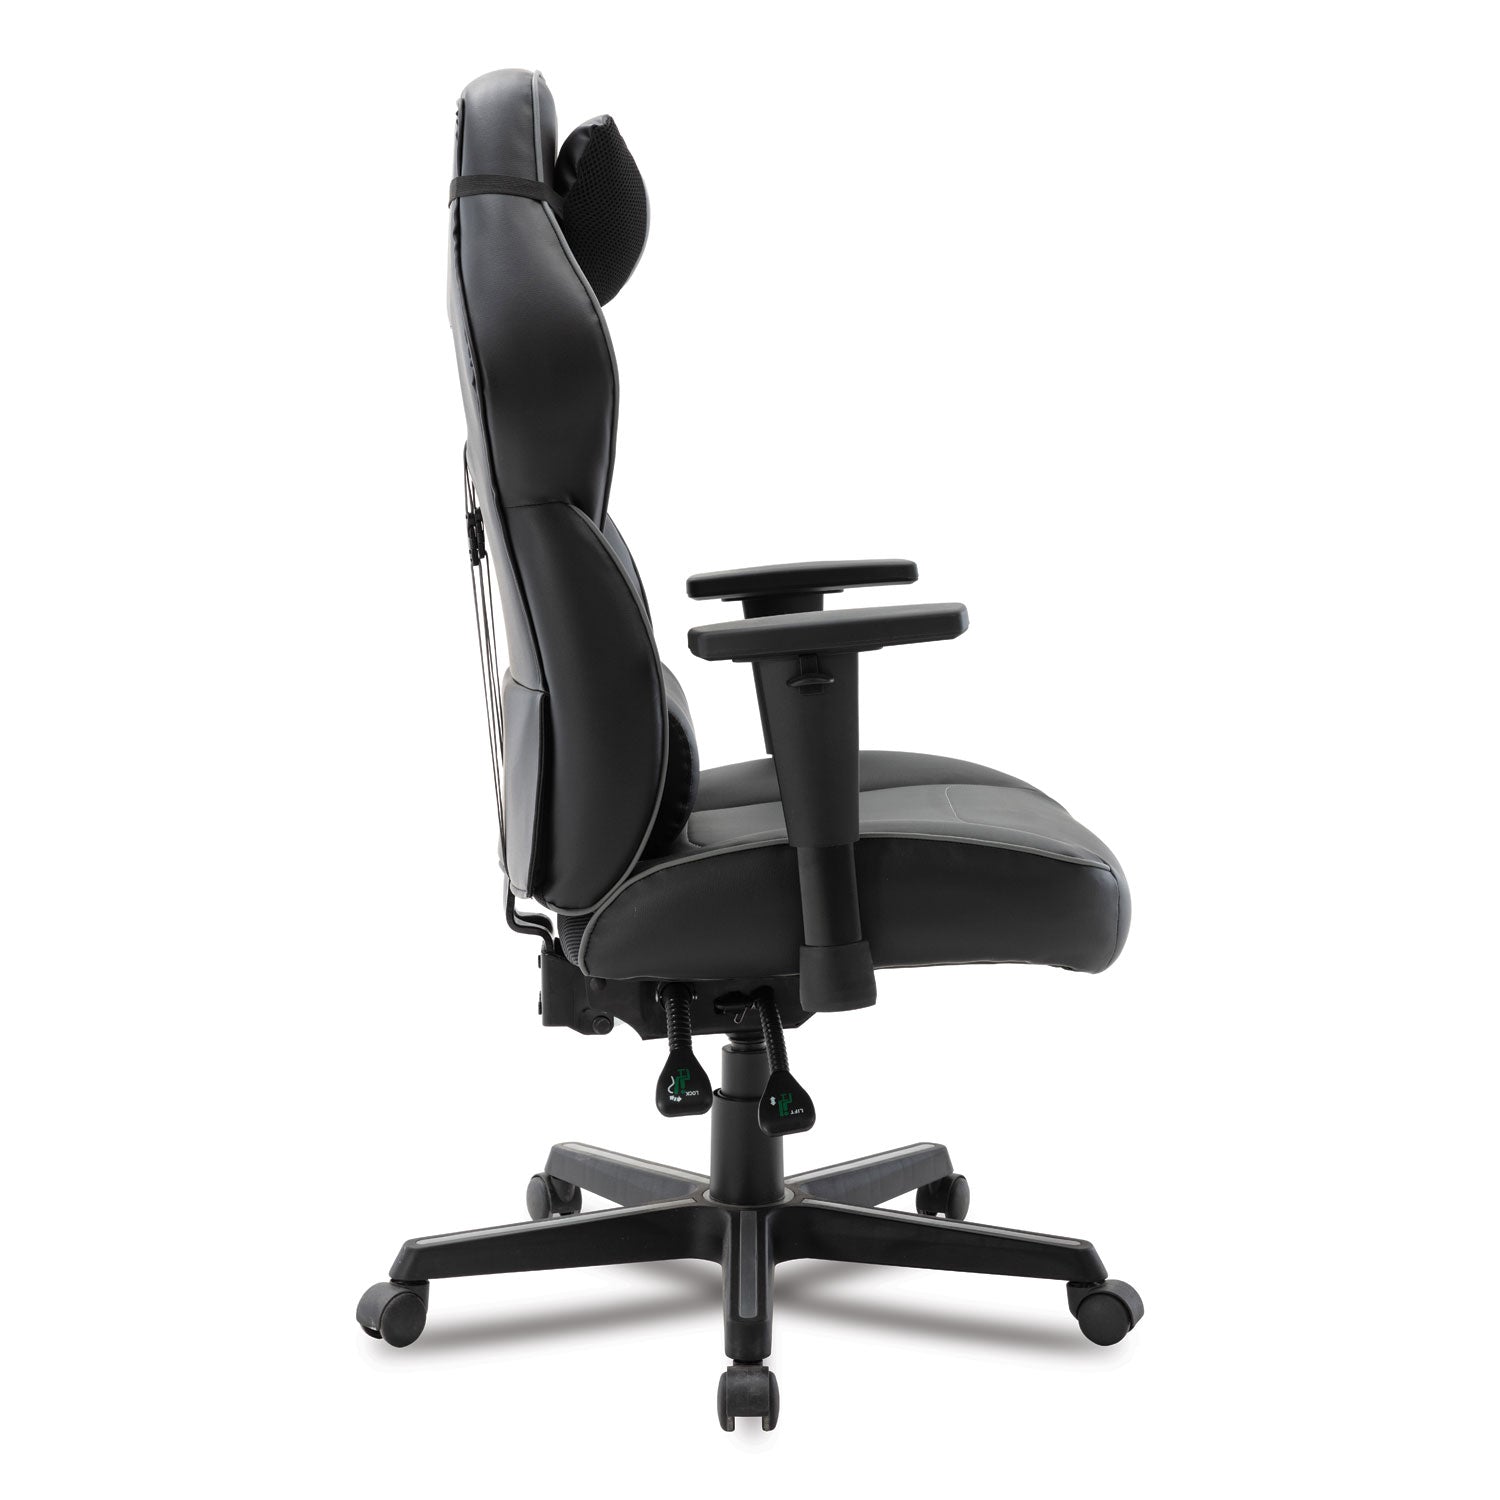 racing-style-ergonomic-gaming-chair-supports-275-lb-1591-to-198-seat-height-black-gray-trim-seat-back-black-gray-base_alegm4146 - 5